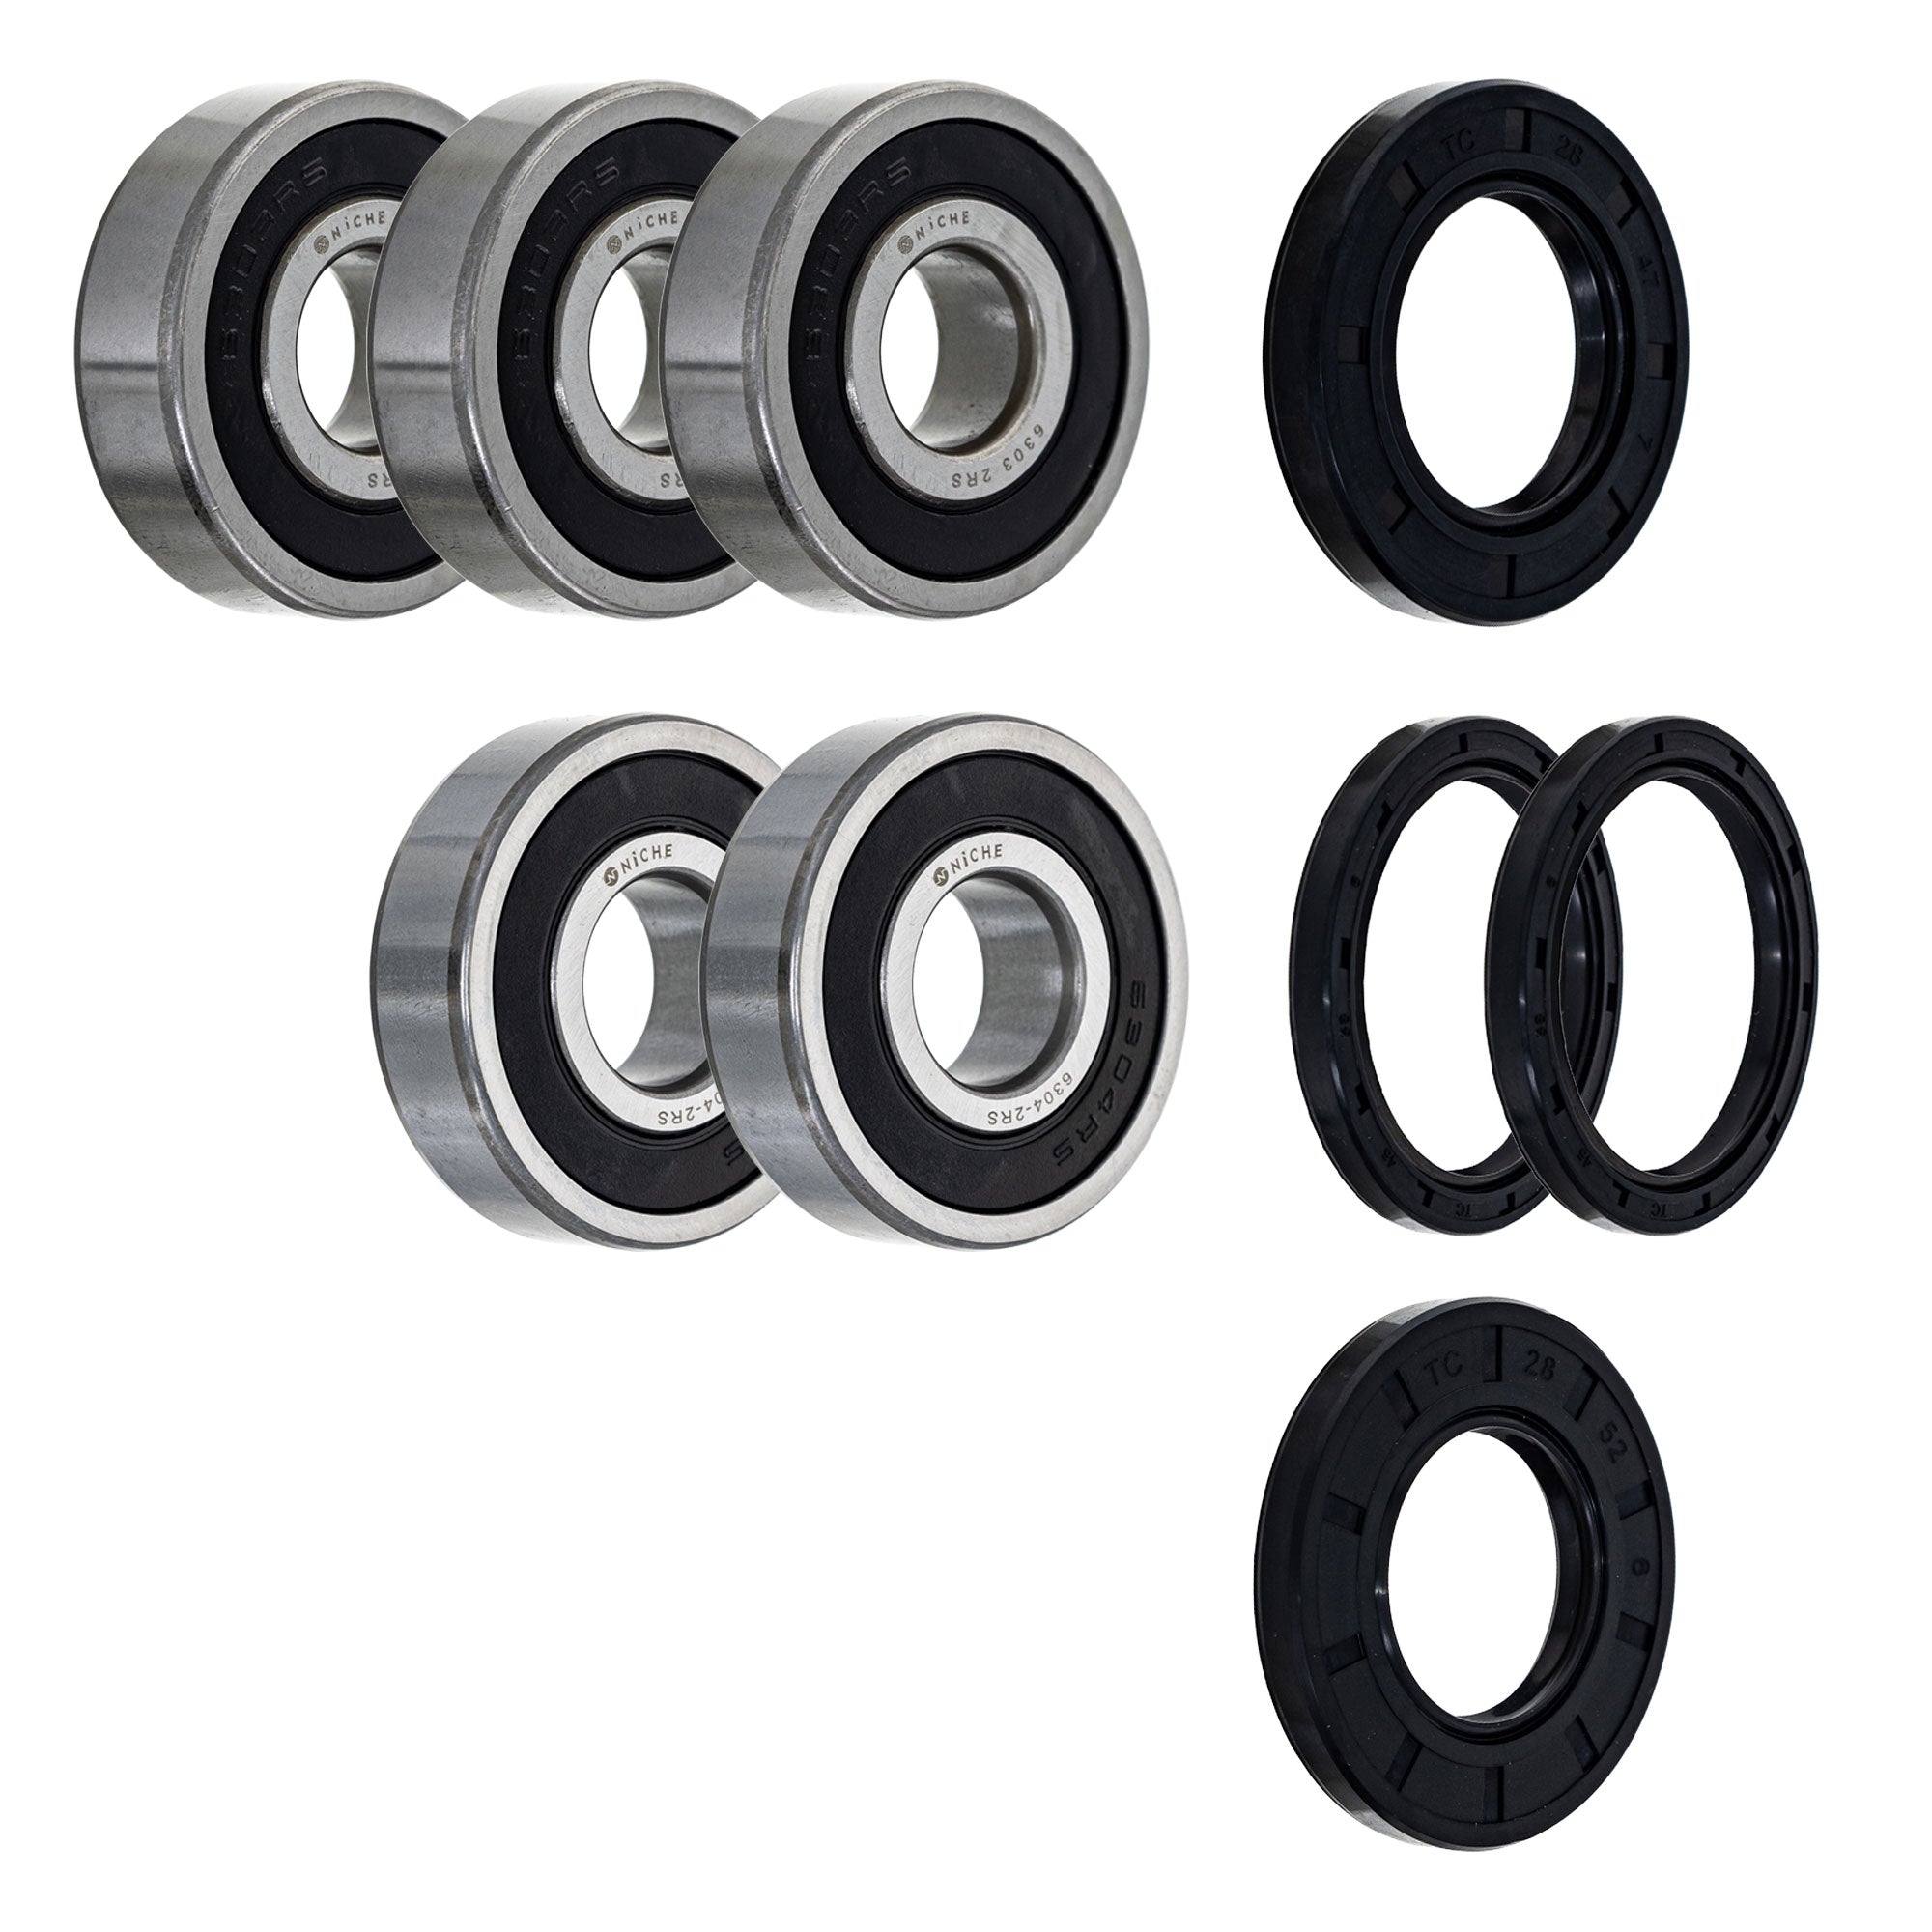 Wheel Bearing Seal Kit for zOTHER XS500 RD400 NICHE MK1008635